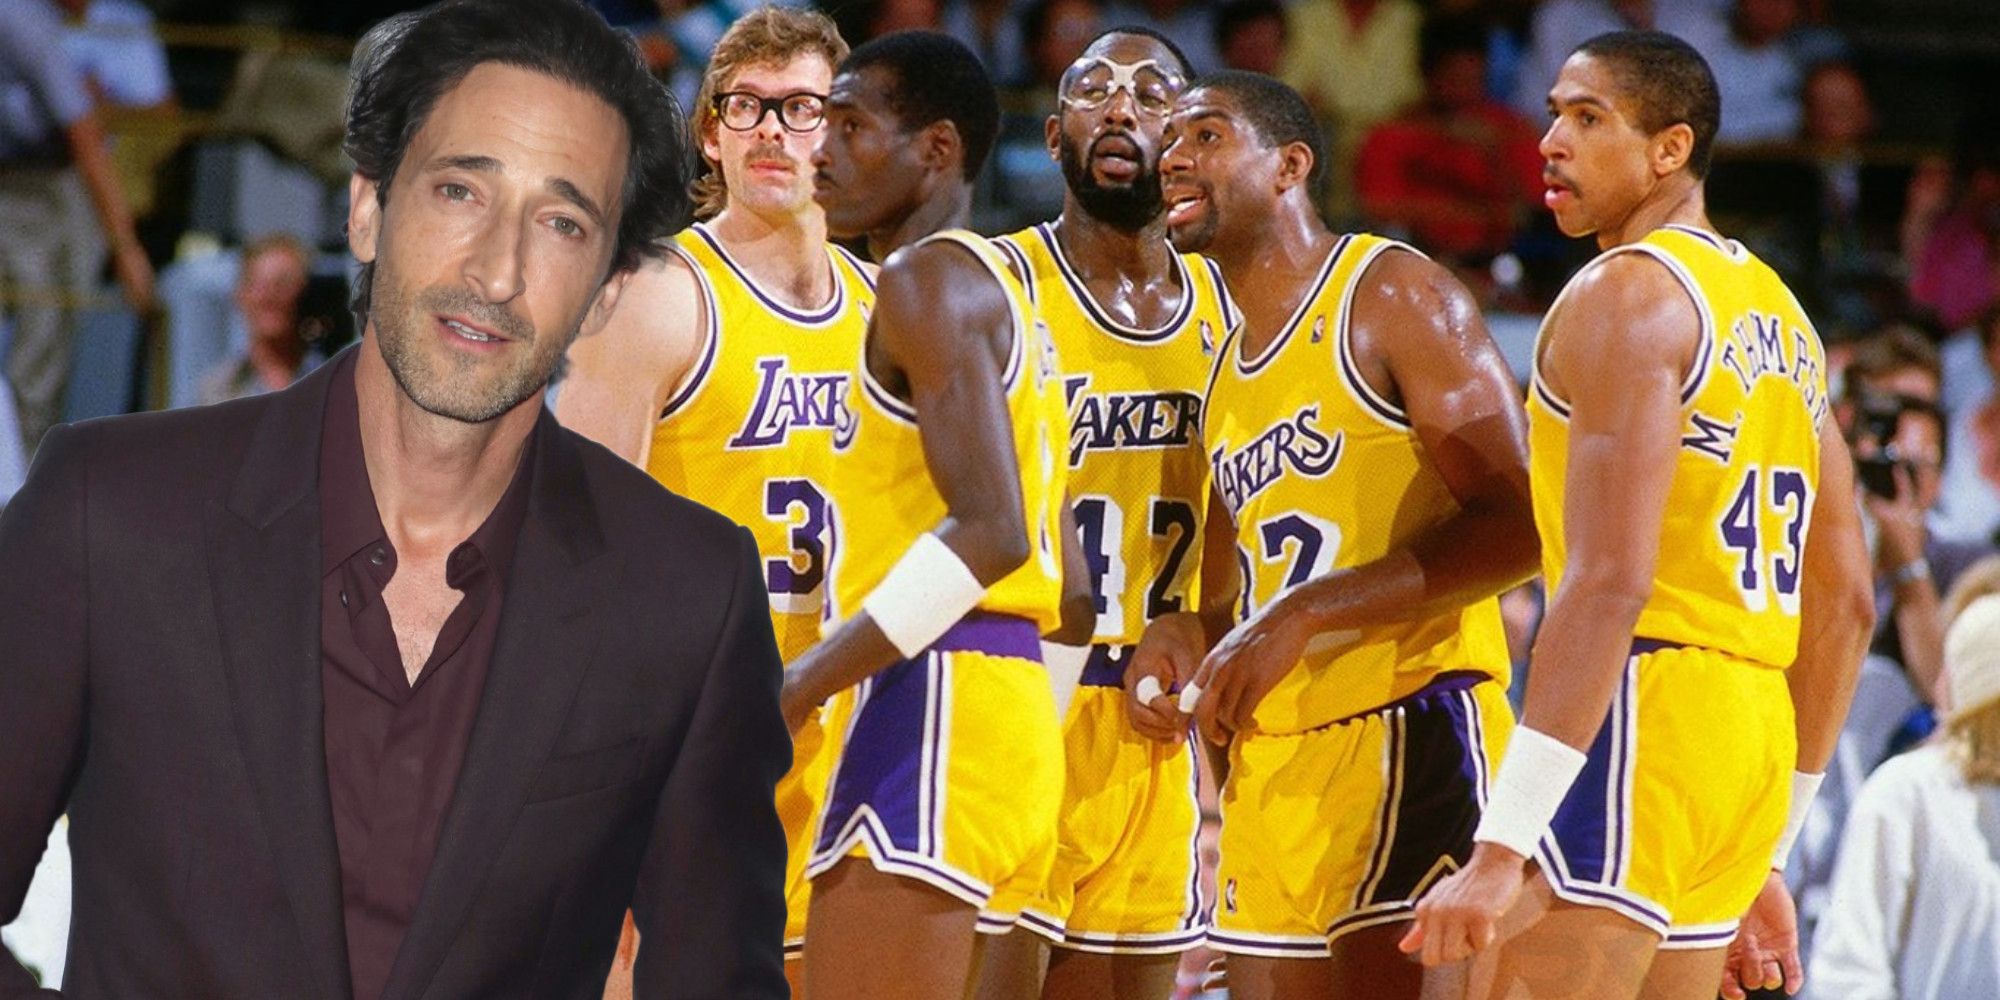 The Los Angeles Lakers and Adrien Brody